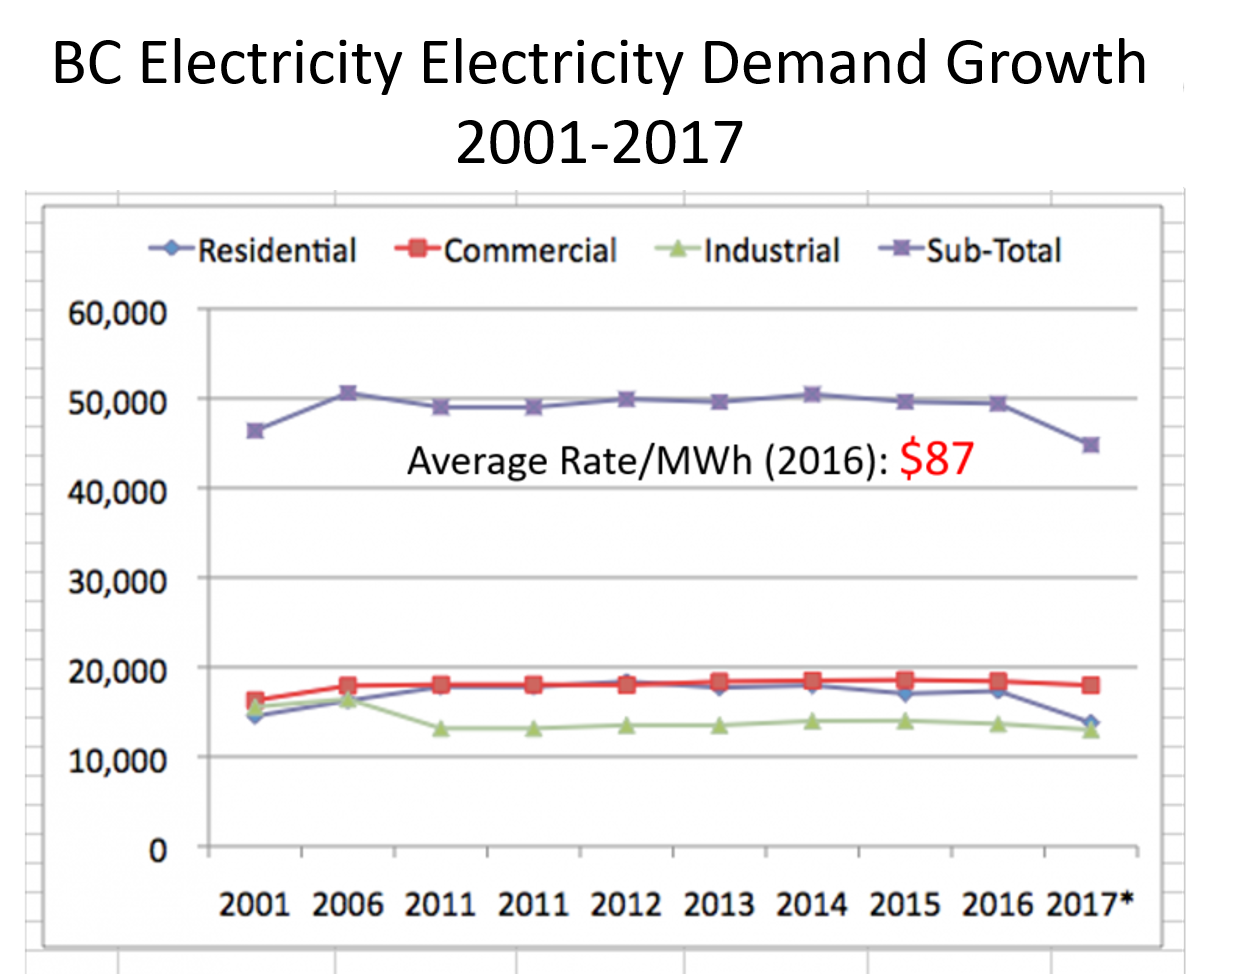 BC Growth in Electricity Demand 2001-2017 - Eoin Finn/My Sea to Sky